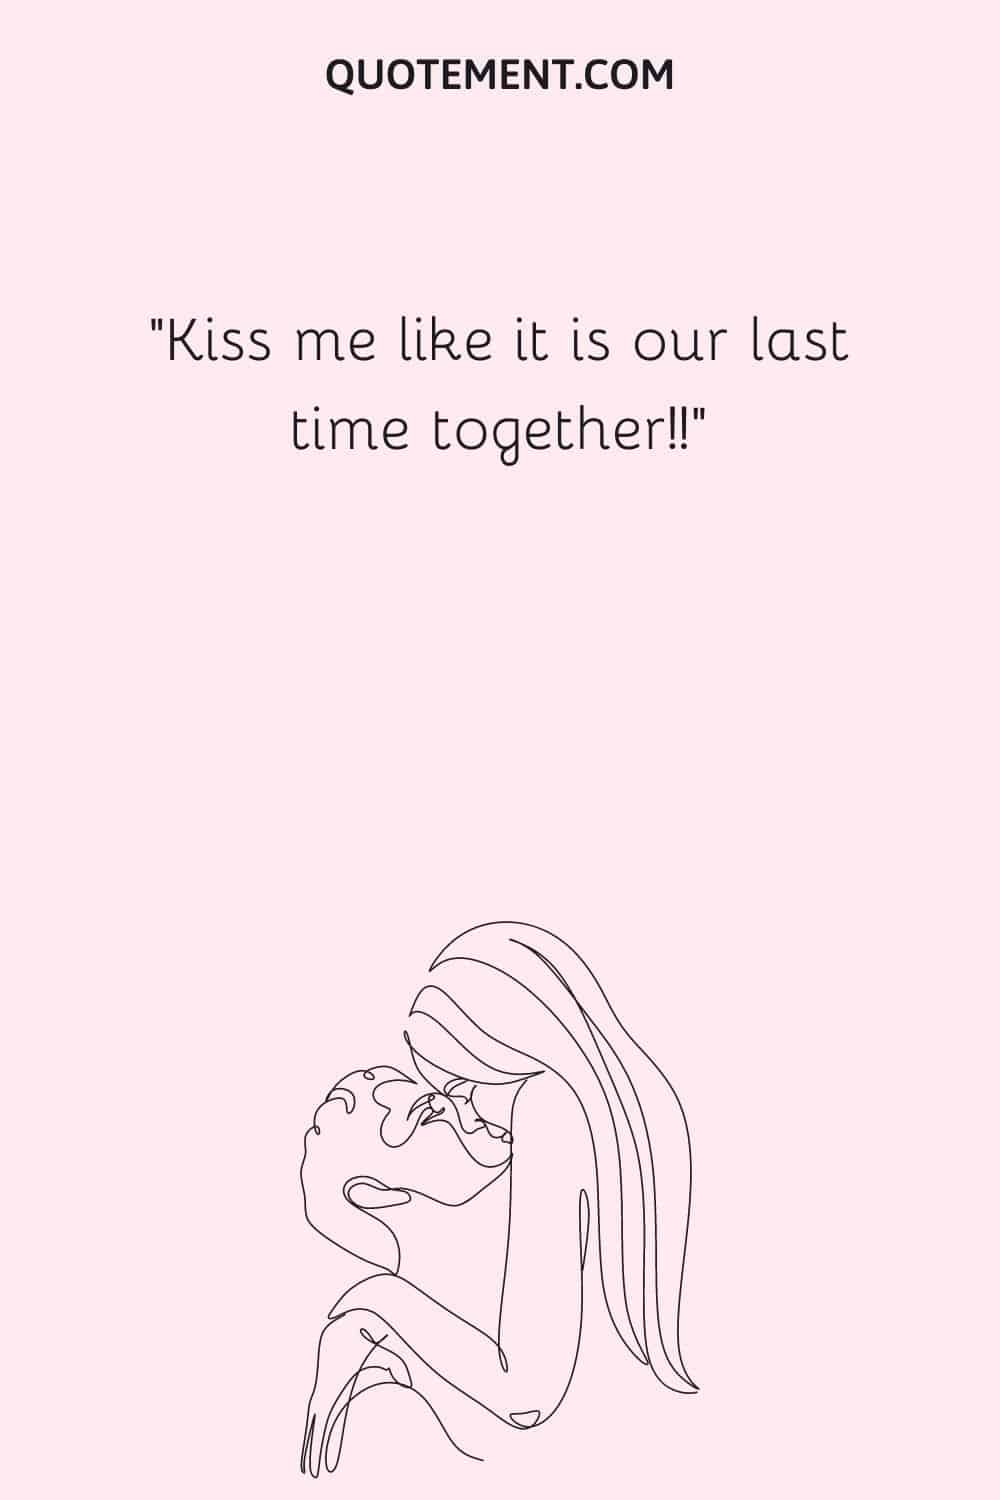 Kiss me like it is our last time together!!